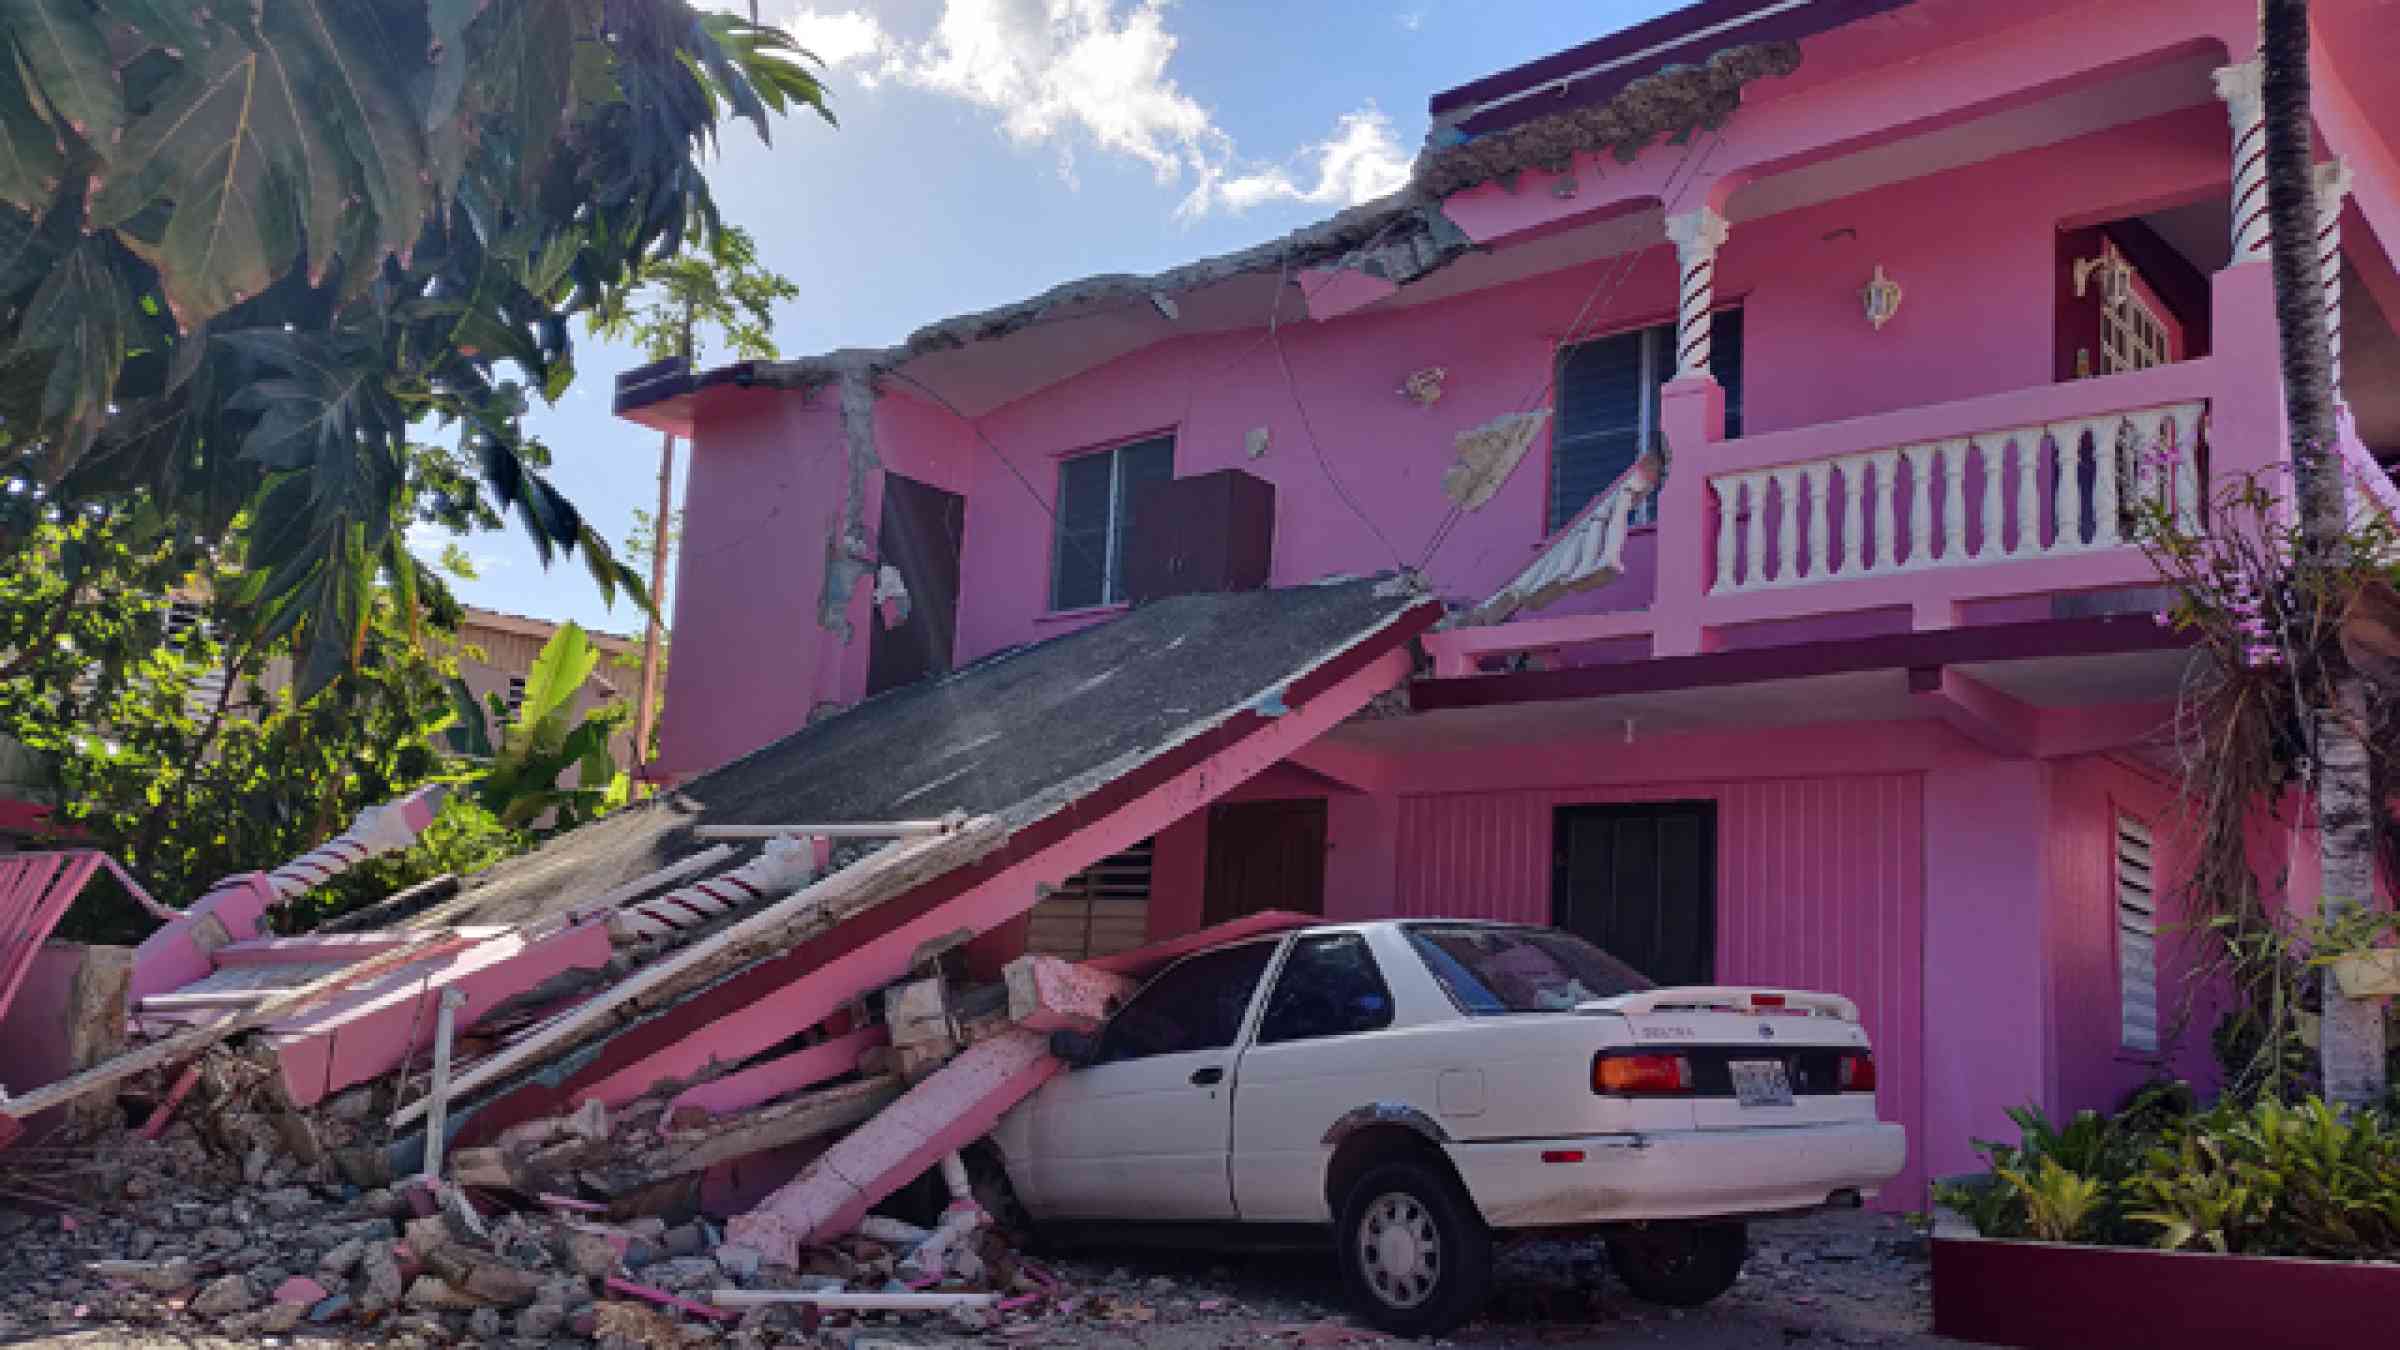 Collapsed home in Yauco, Puerto Rico after 2020 earthquake